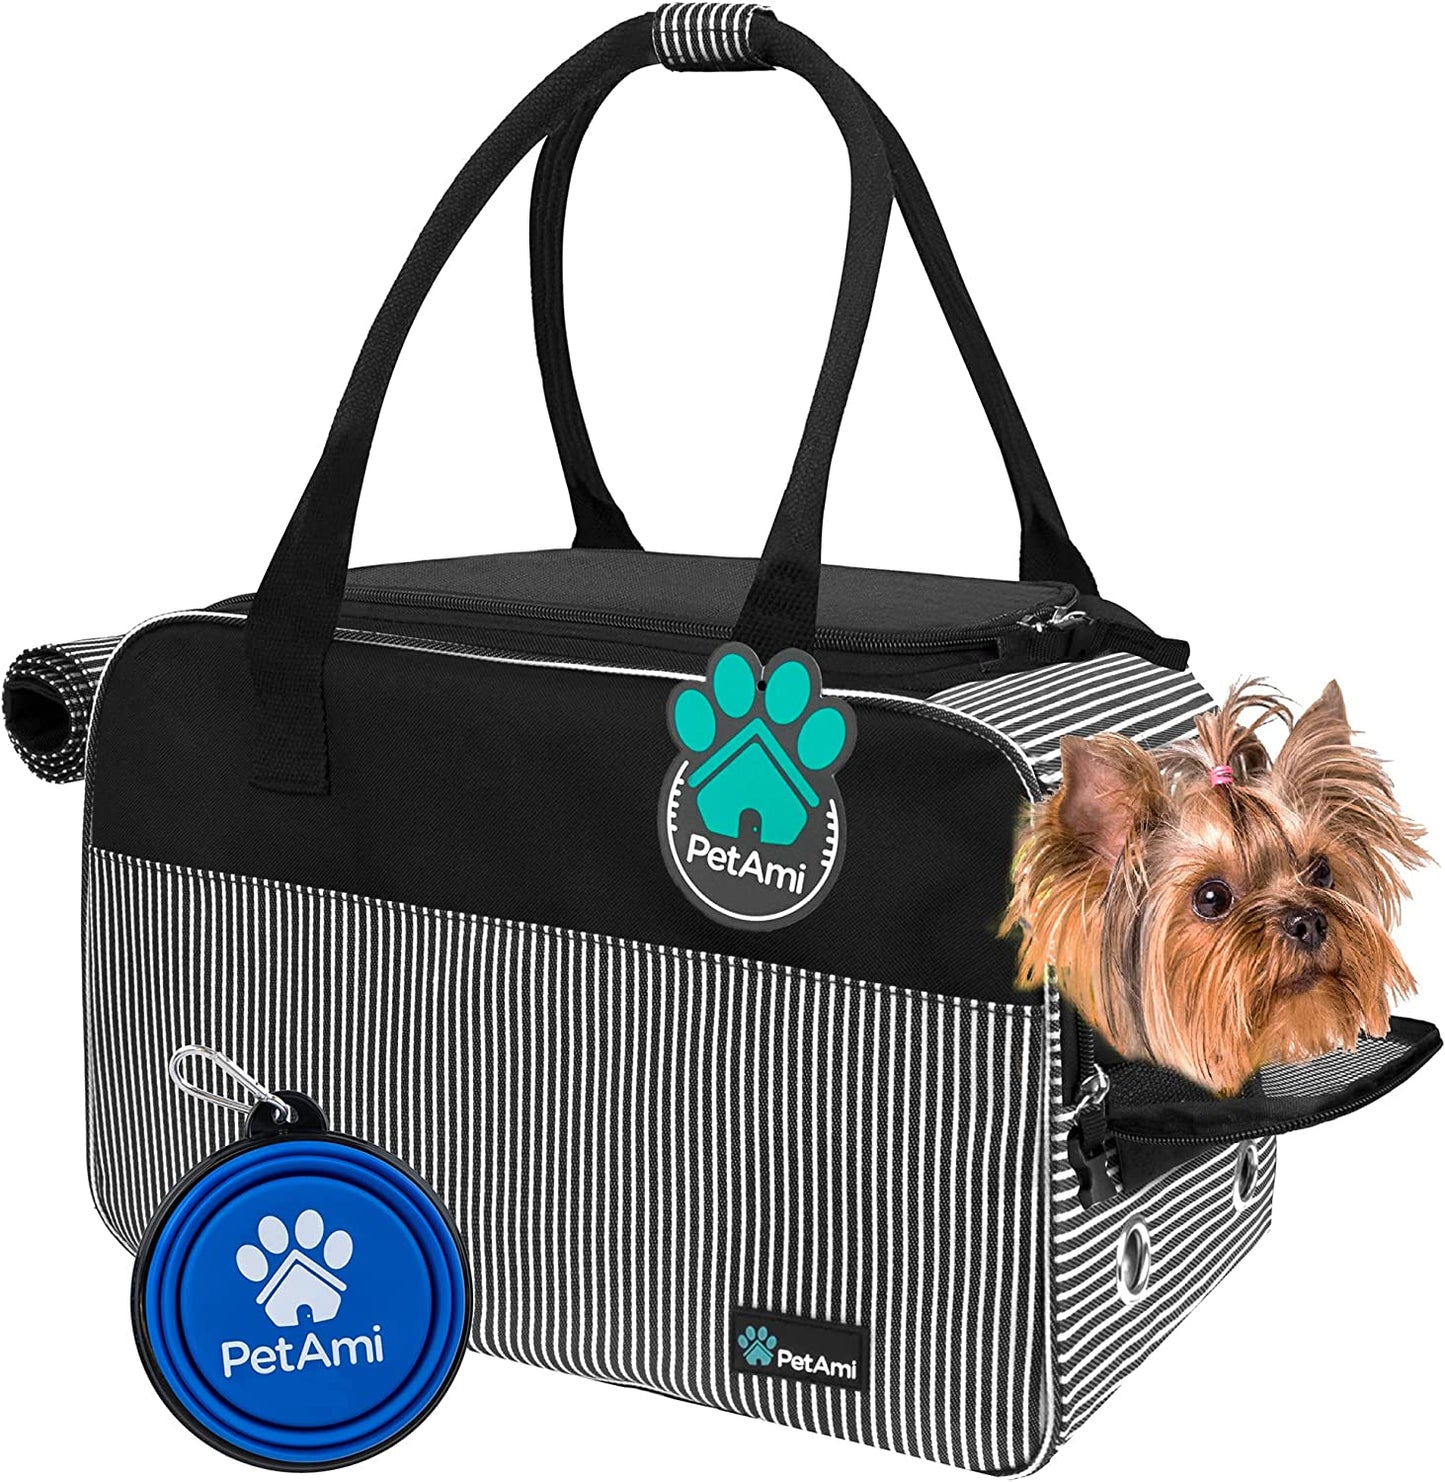 Dog Purse Carrier for Small Dogs, Airline Approved Soft Sided Pet Carrier W/Pockets, Ventilated Dog Carrying Bag Puppy Cat, Dog Travel Supplies Accessories Carry Tote, Sherpa Bed, Stripe Black